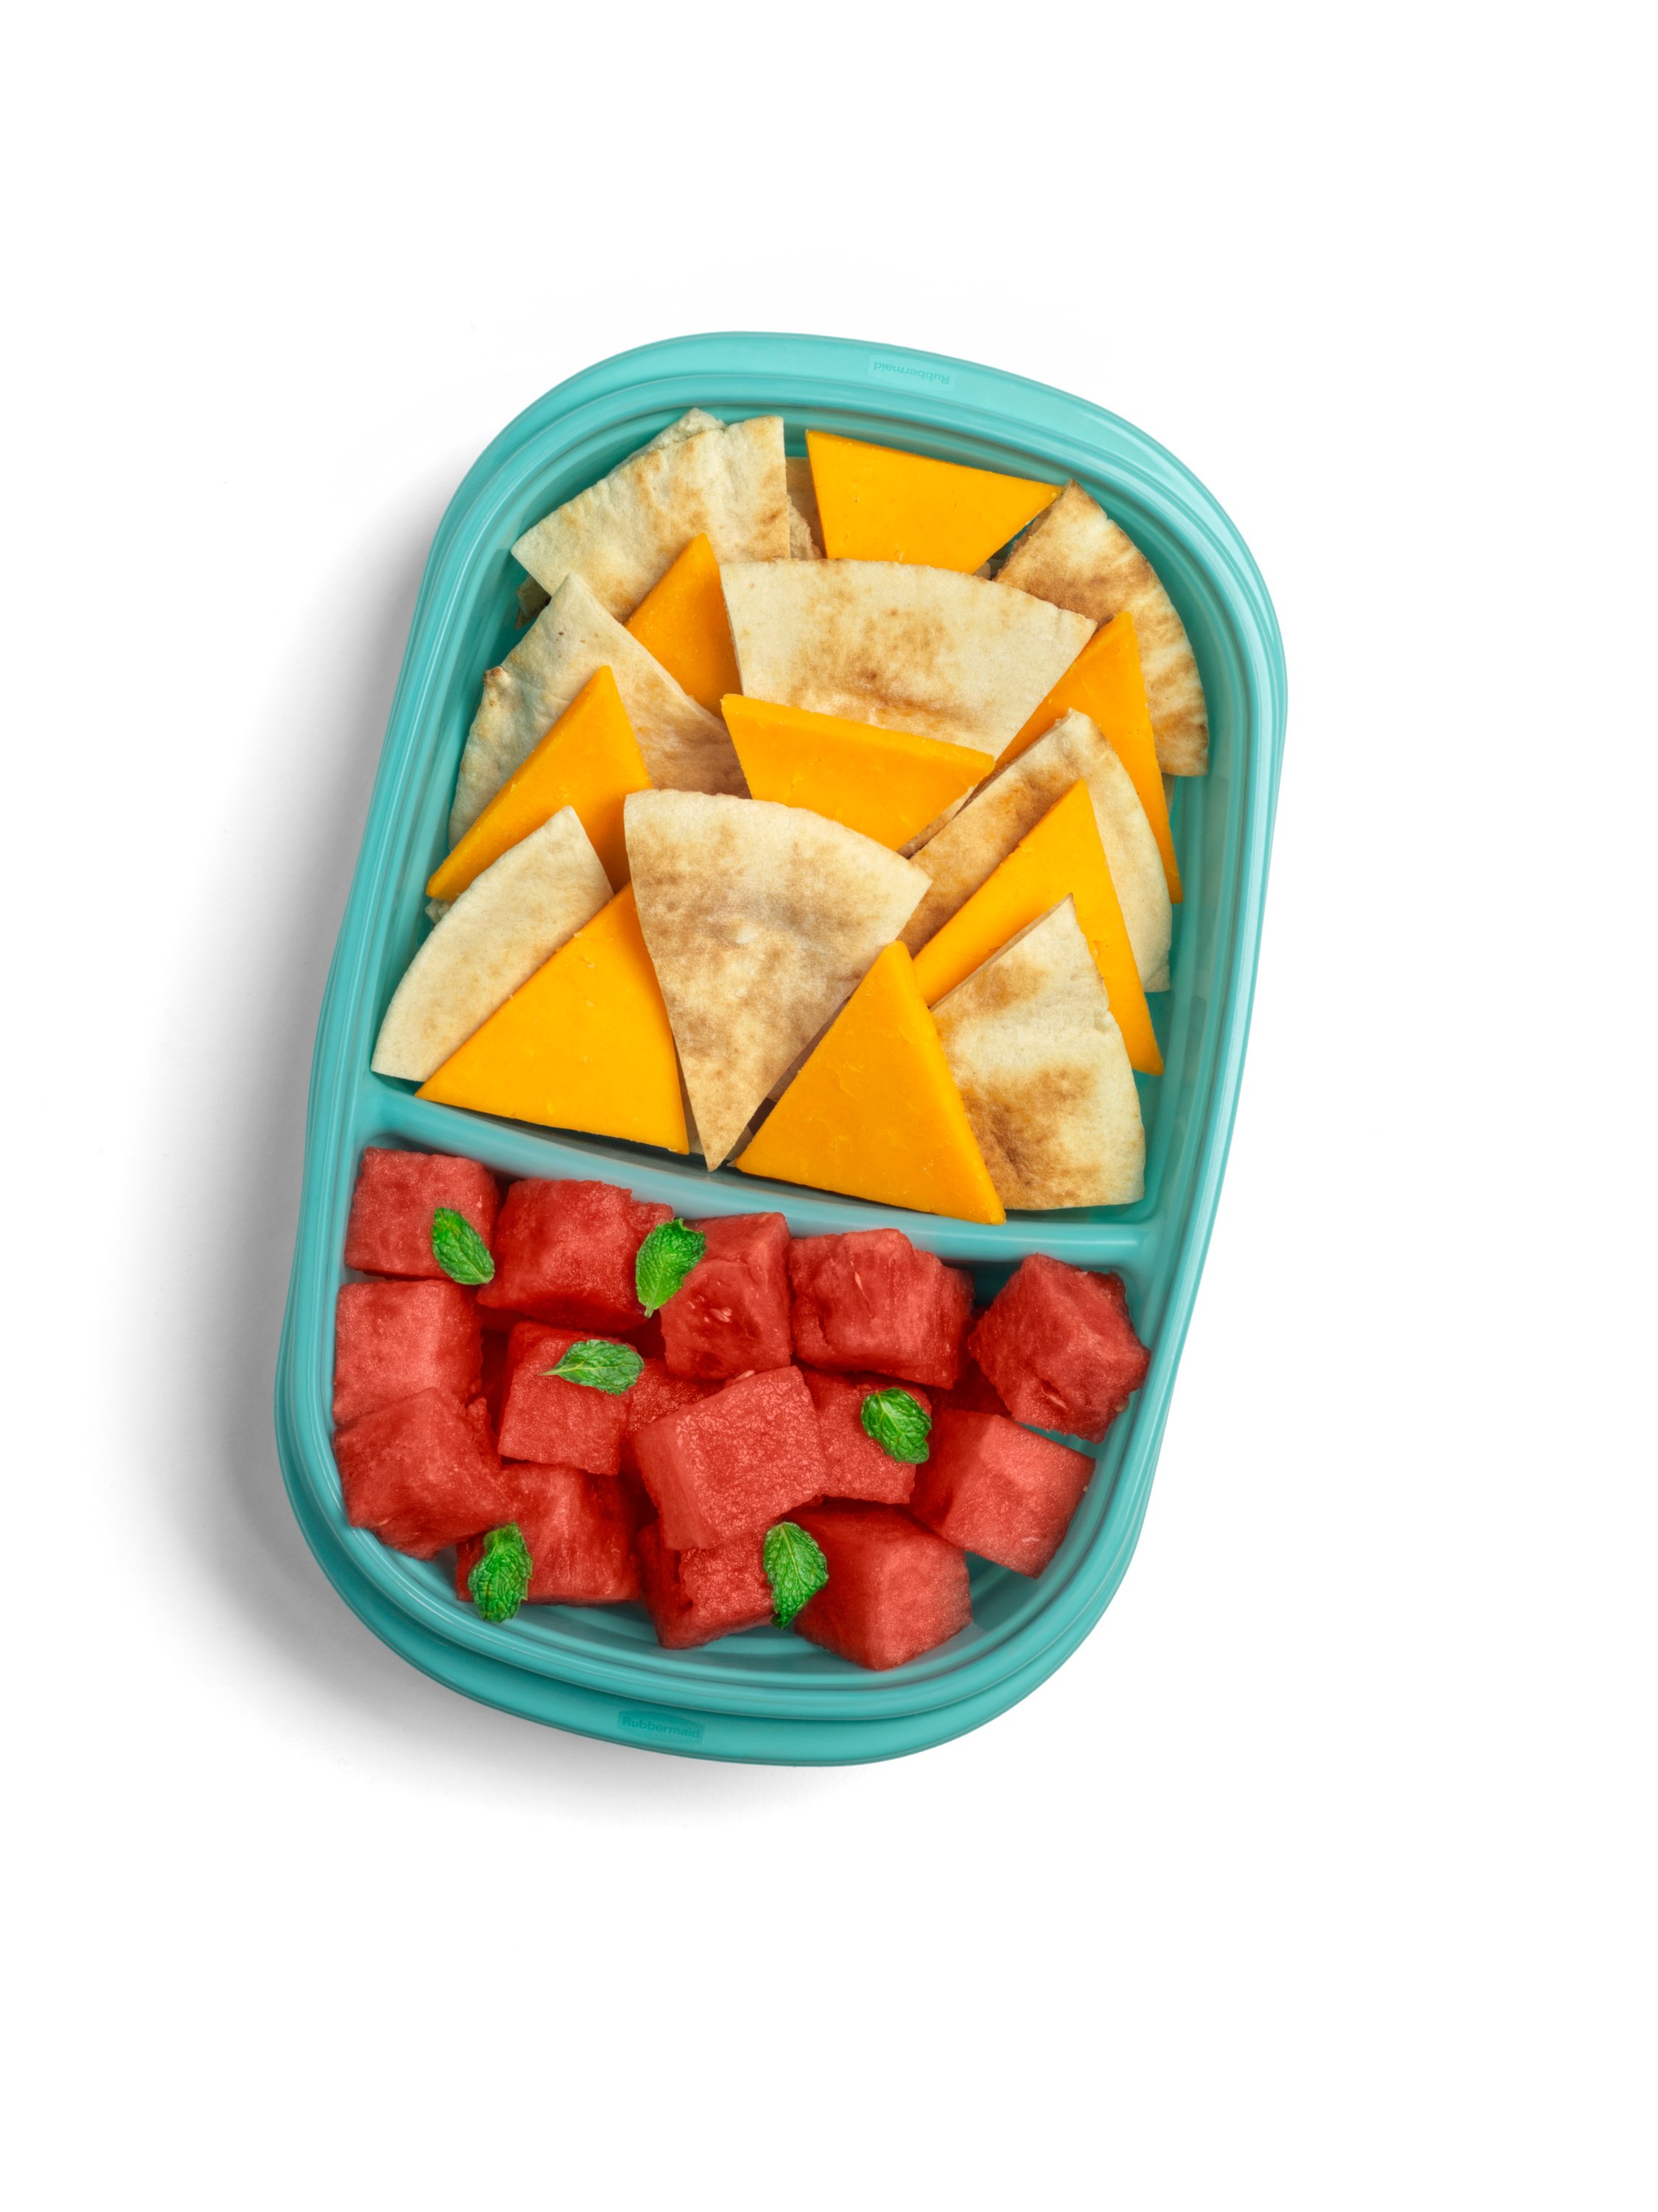 https://s7d9.scene7.com/is/image/NewellRubbermaid/Teal%20div%20rect%20w%20food%20no%20lid